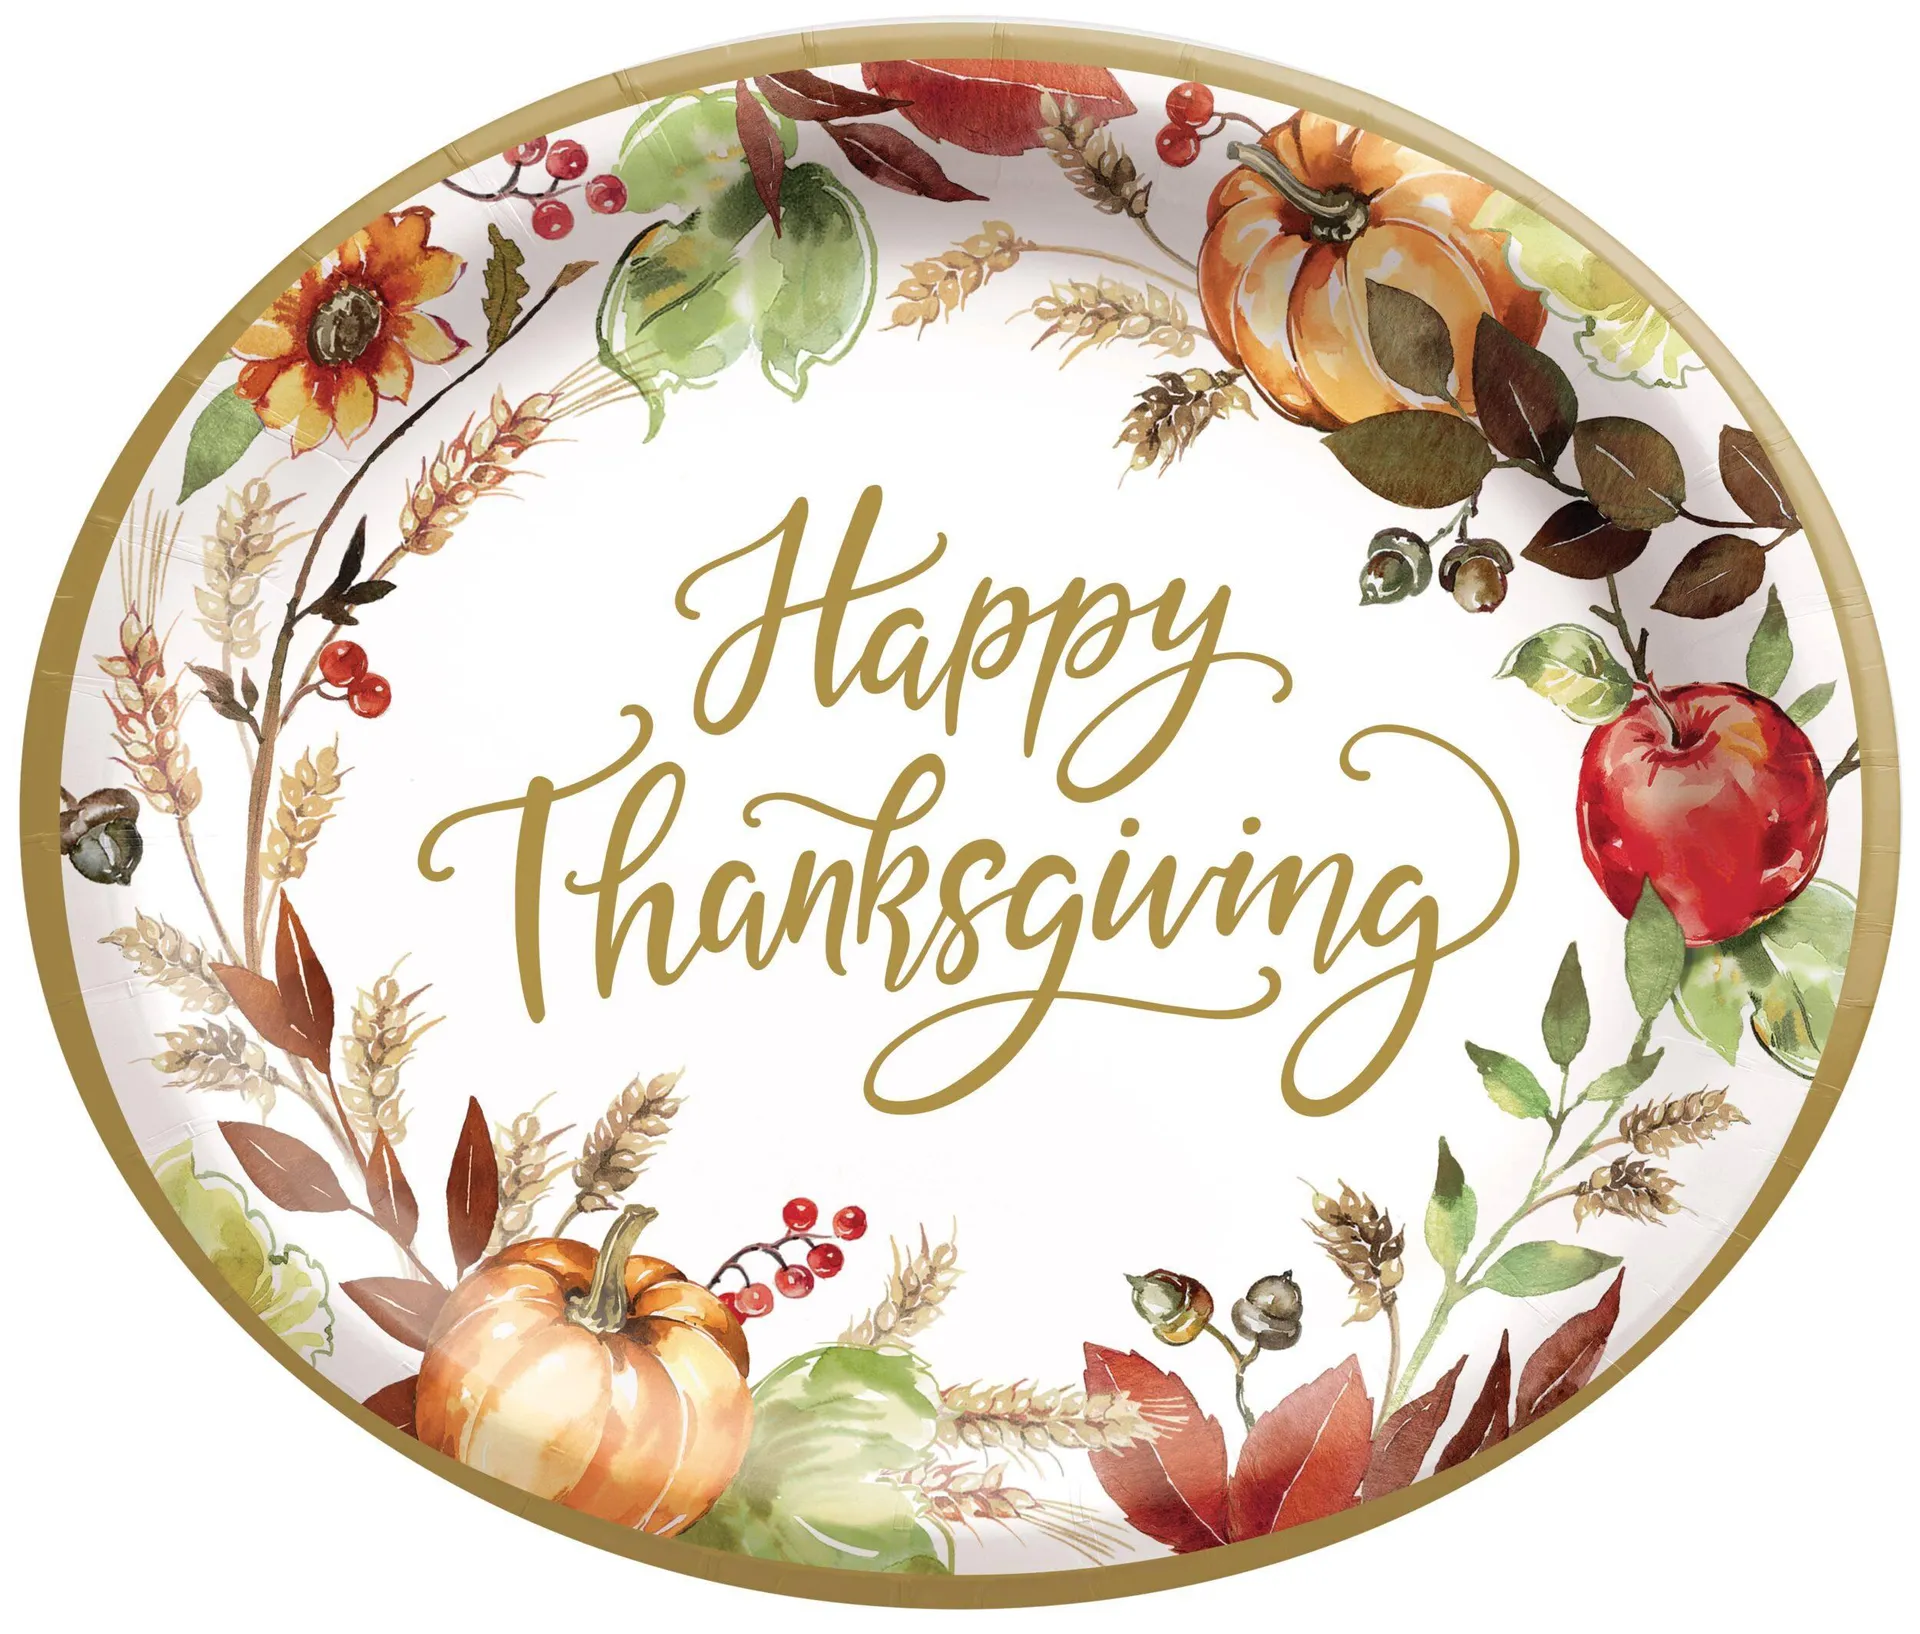 Grateful Day "Happy Thanksgiving" Oval Paper Disposable Platters, White Multi-Coloured, Pumpkin/Flower, 12-in, 18-pk, for Thanksgiving